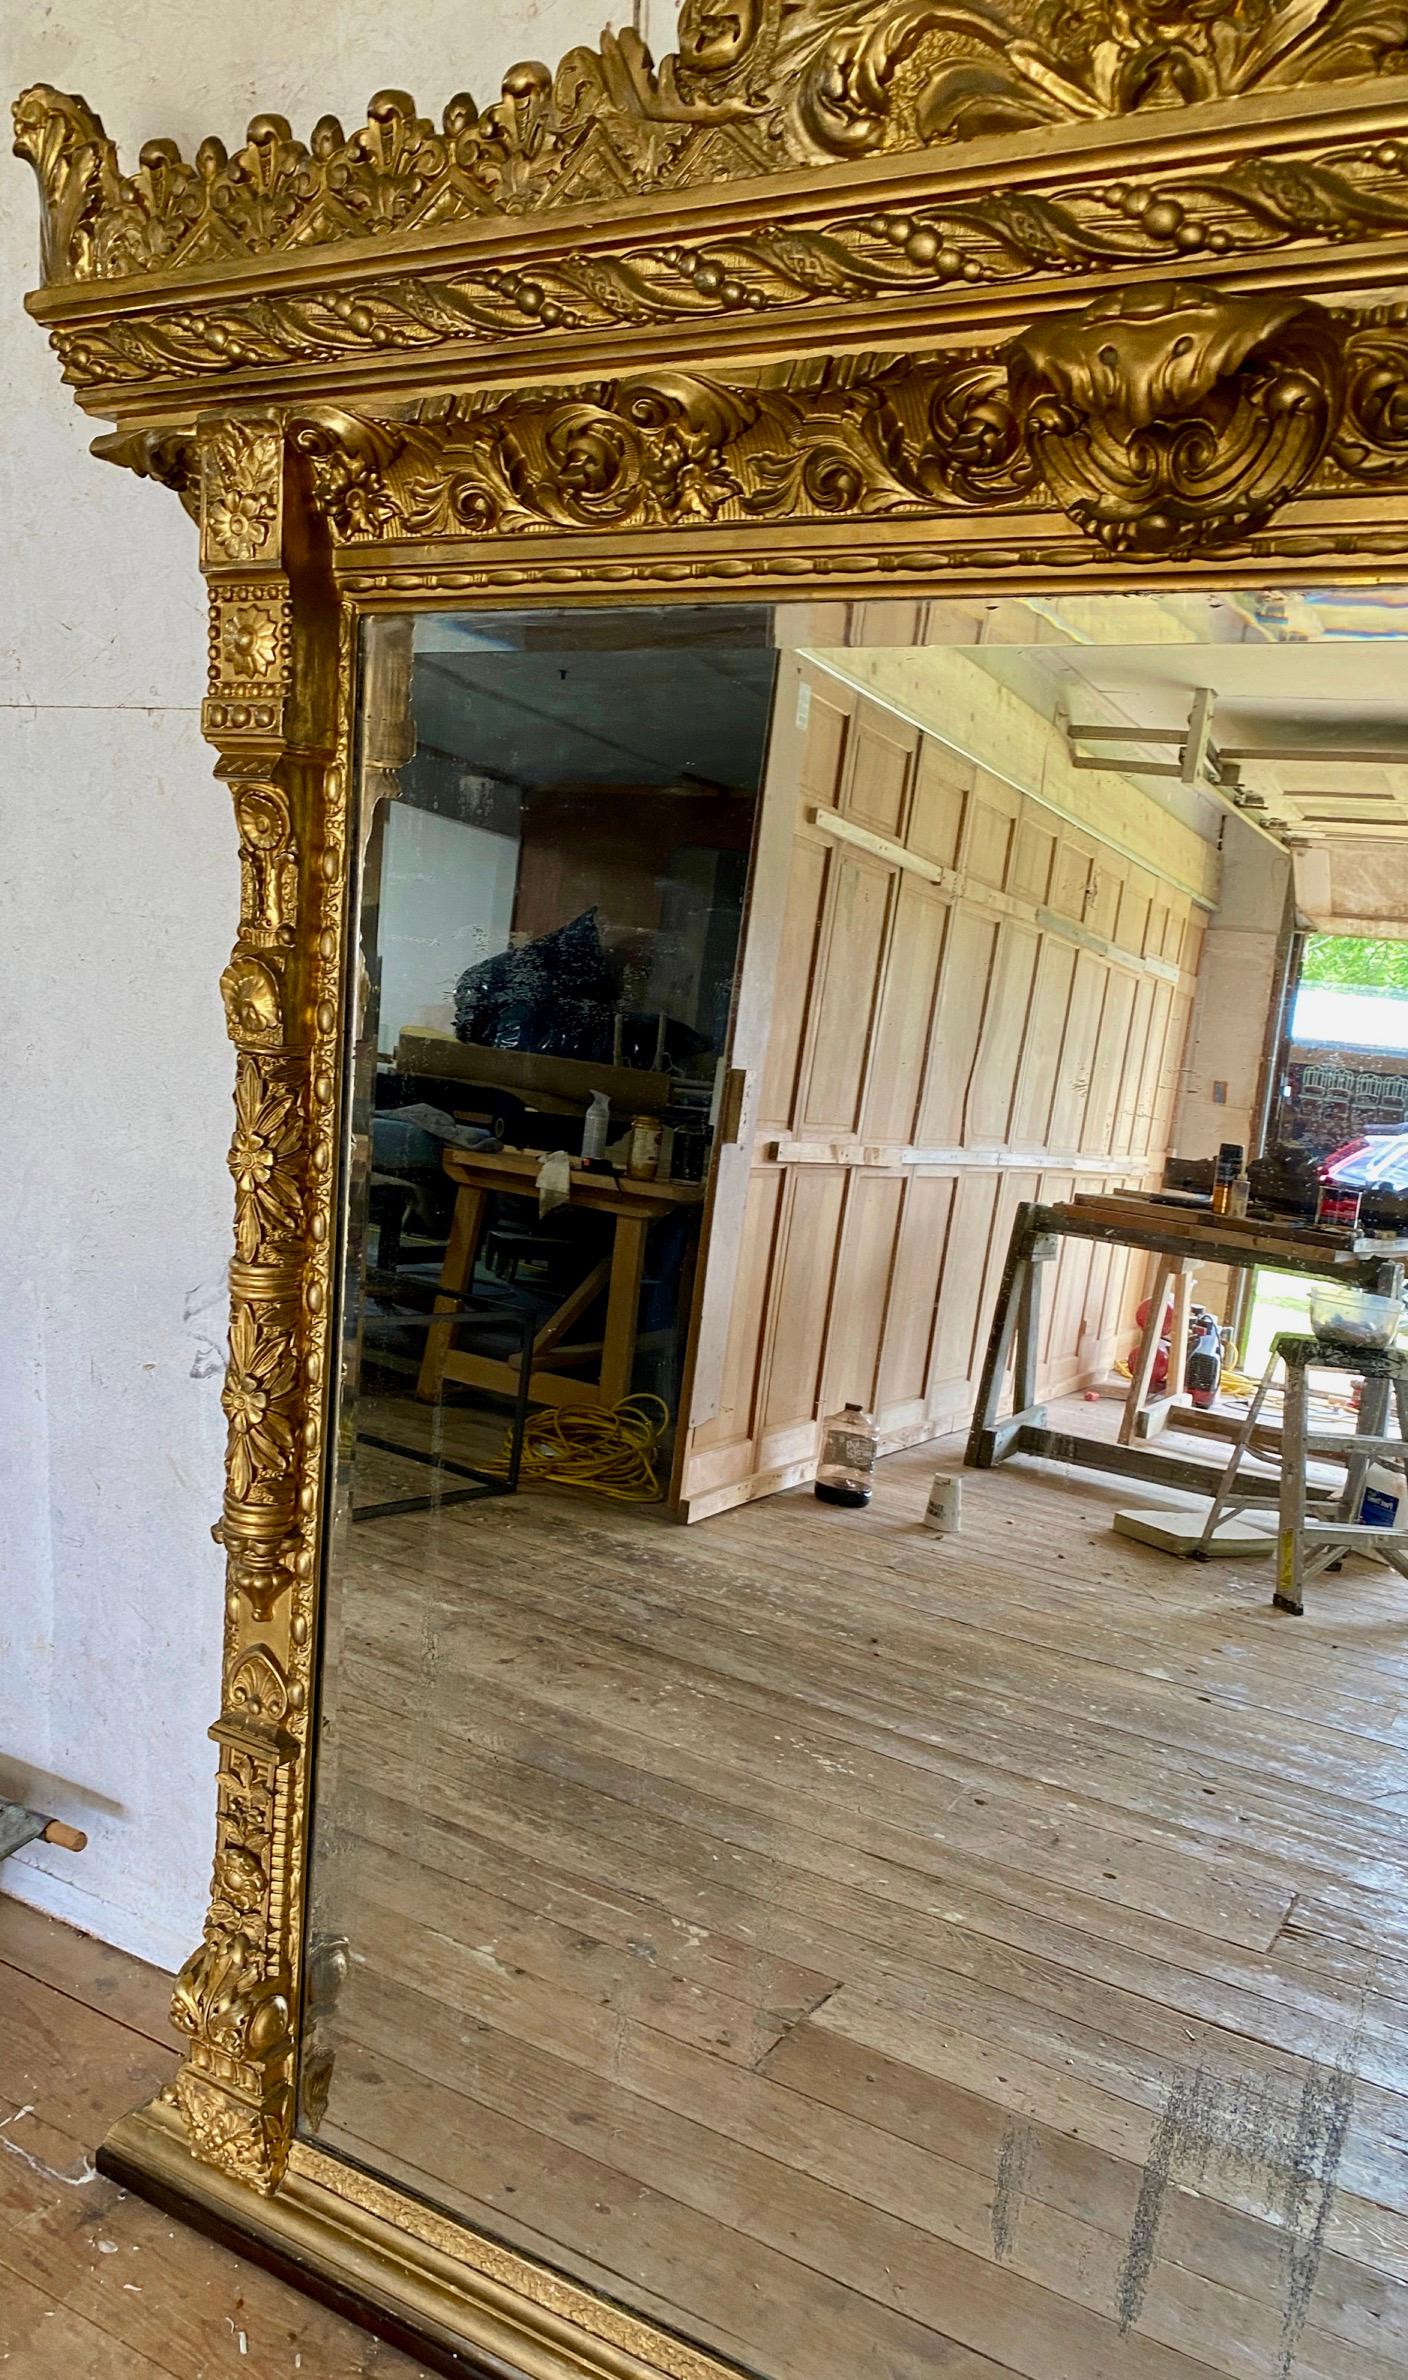 Impressive monumental scale antique Italian rectangular mantel or fireplace mirror. The piece has two bold pillars with highly detailed carved molding all the way around. The Italian Renaissance revival trompe l'oeil mirror with lovely antique